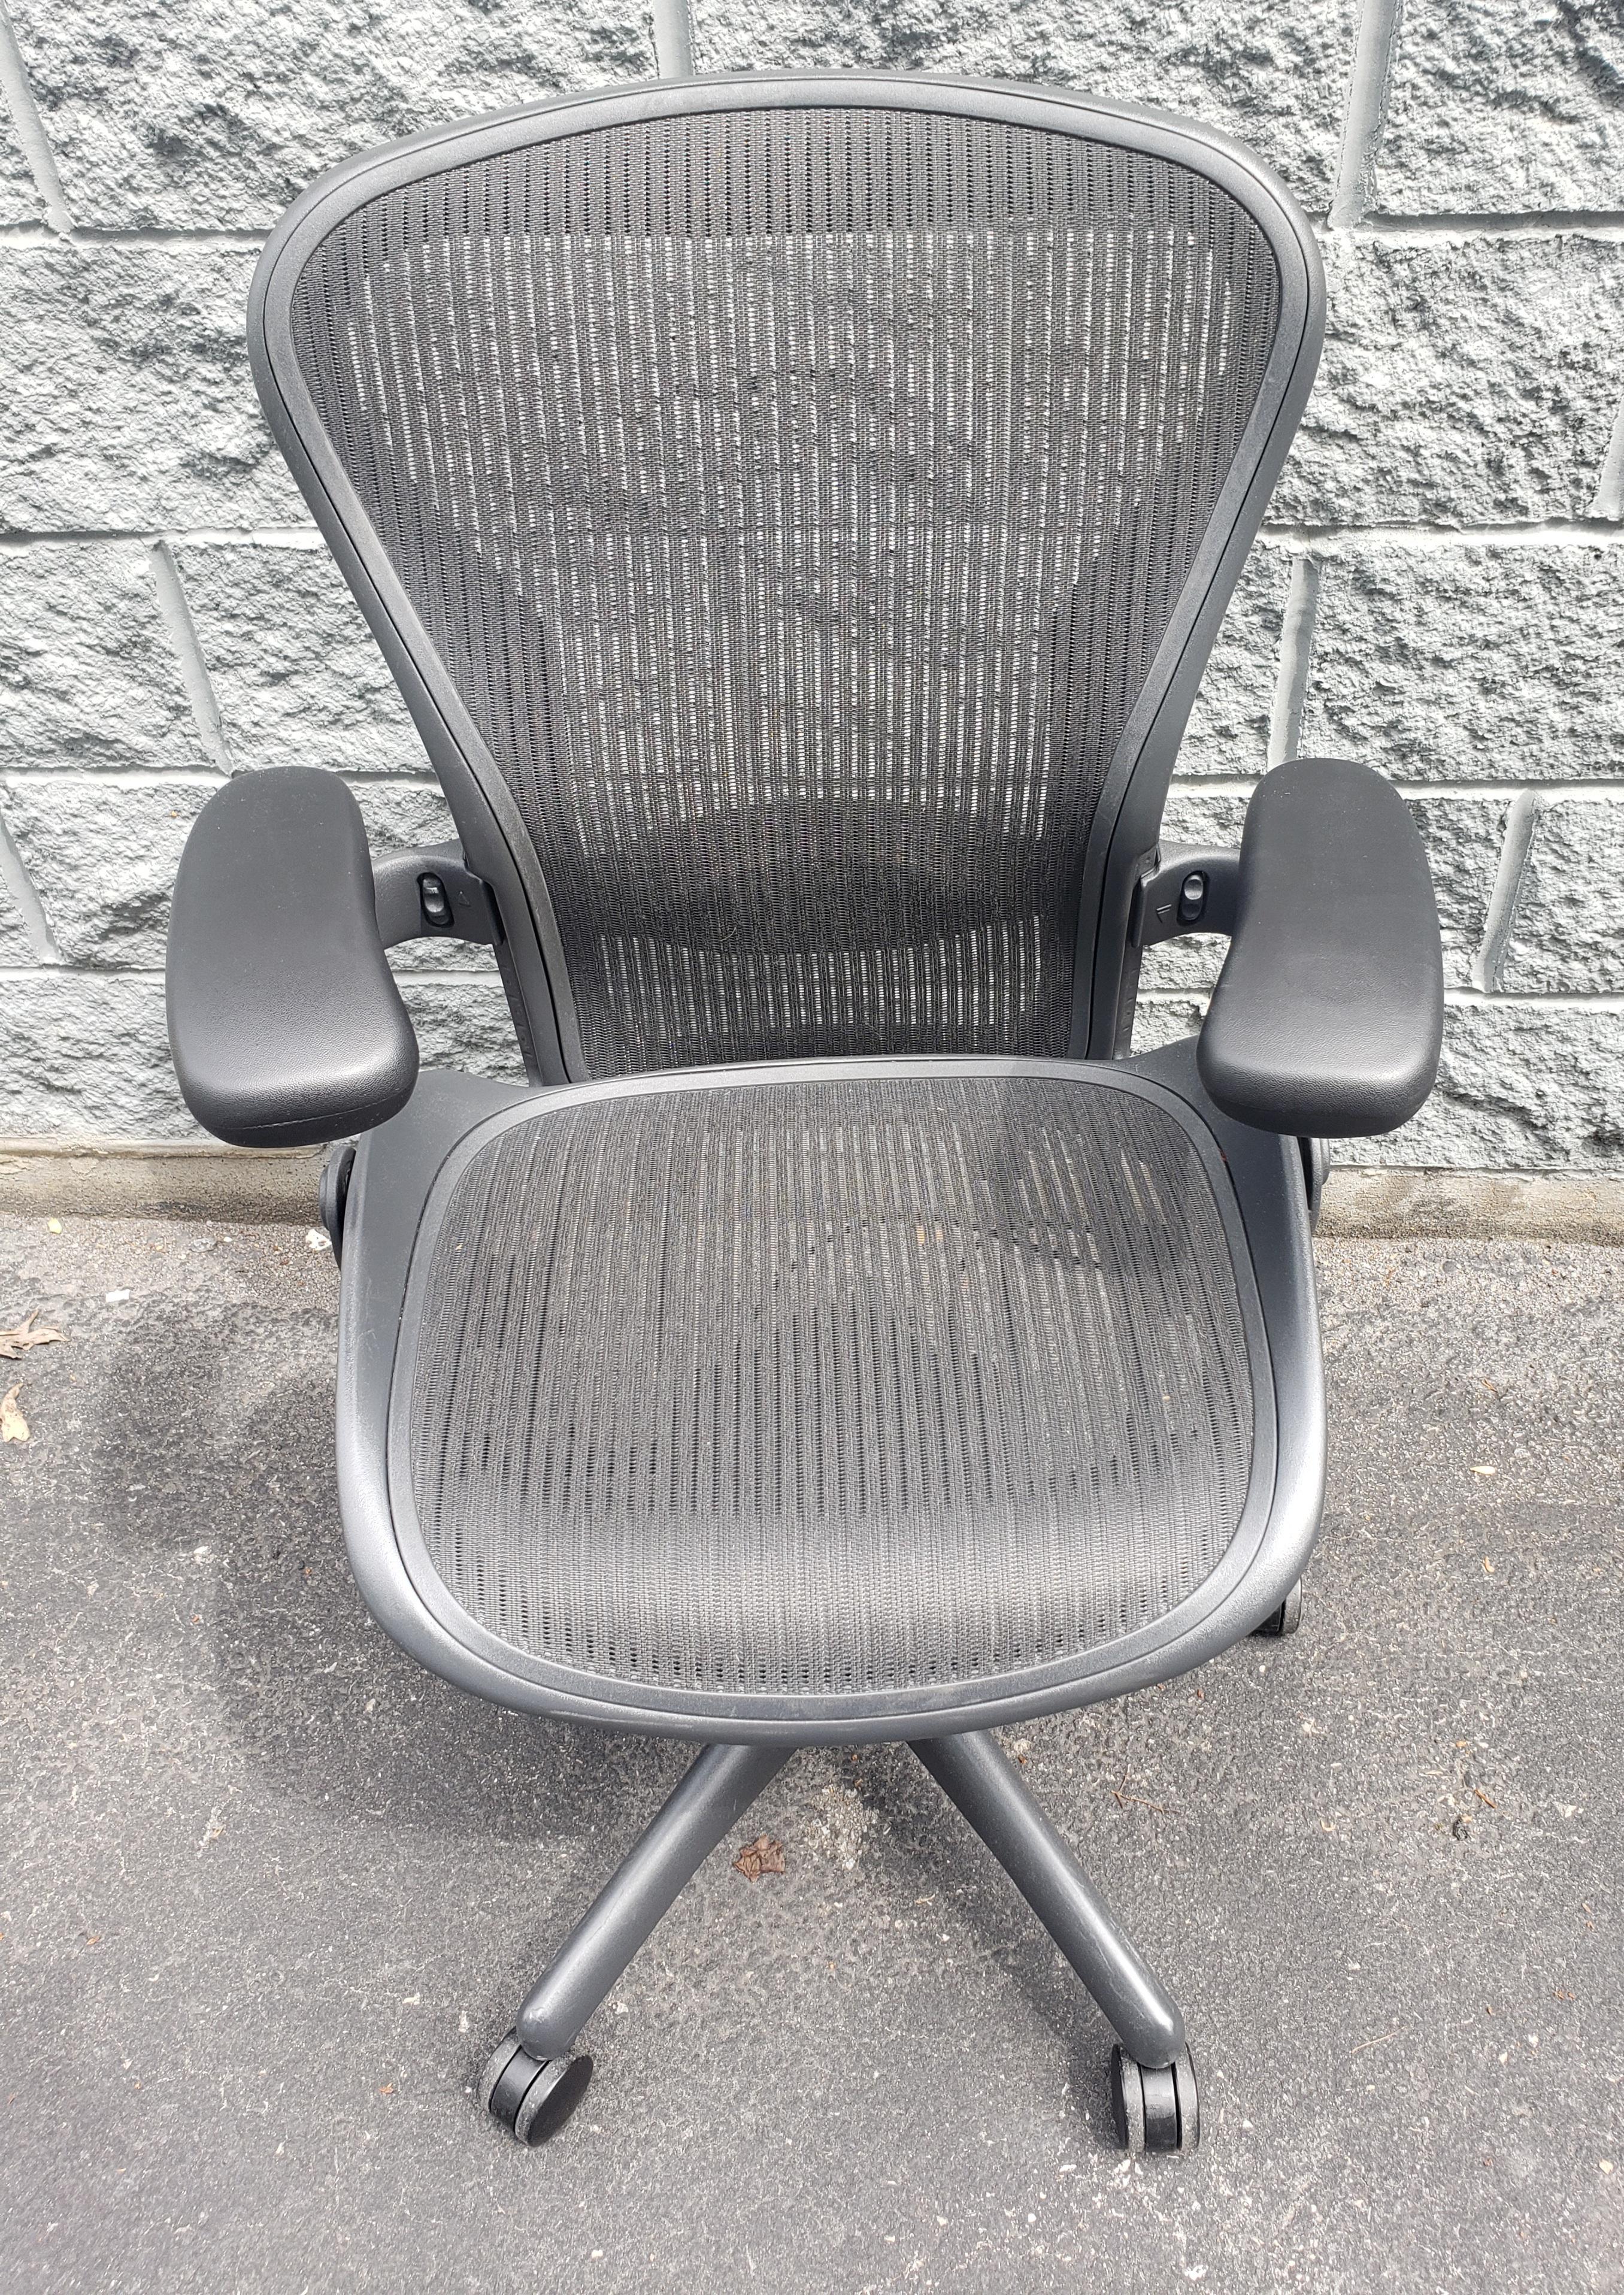 Other Original Herman Miller Fully Adjustable Classic Aeron Chair For Sale